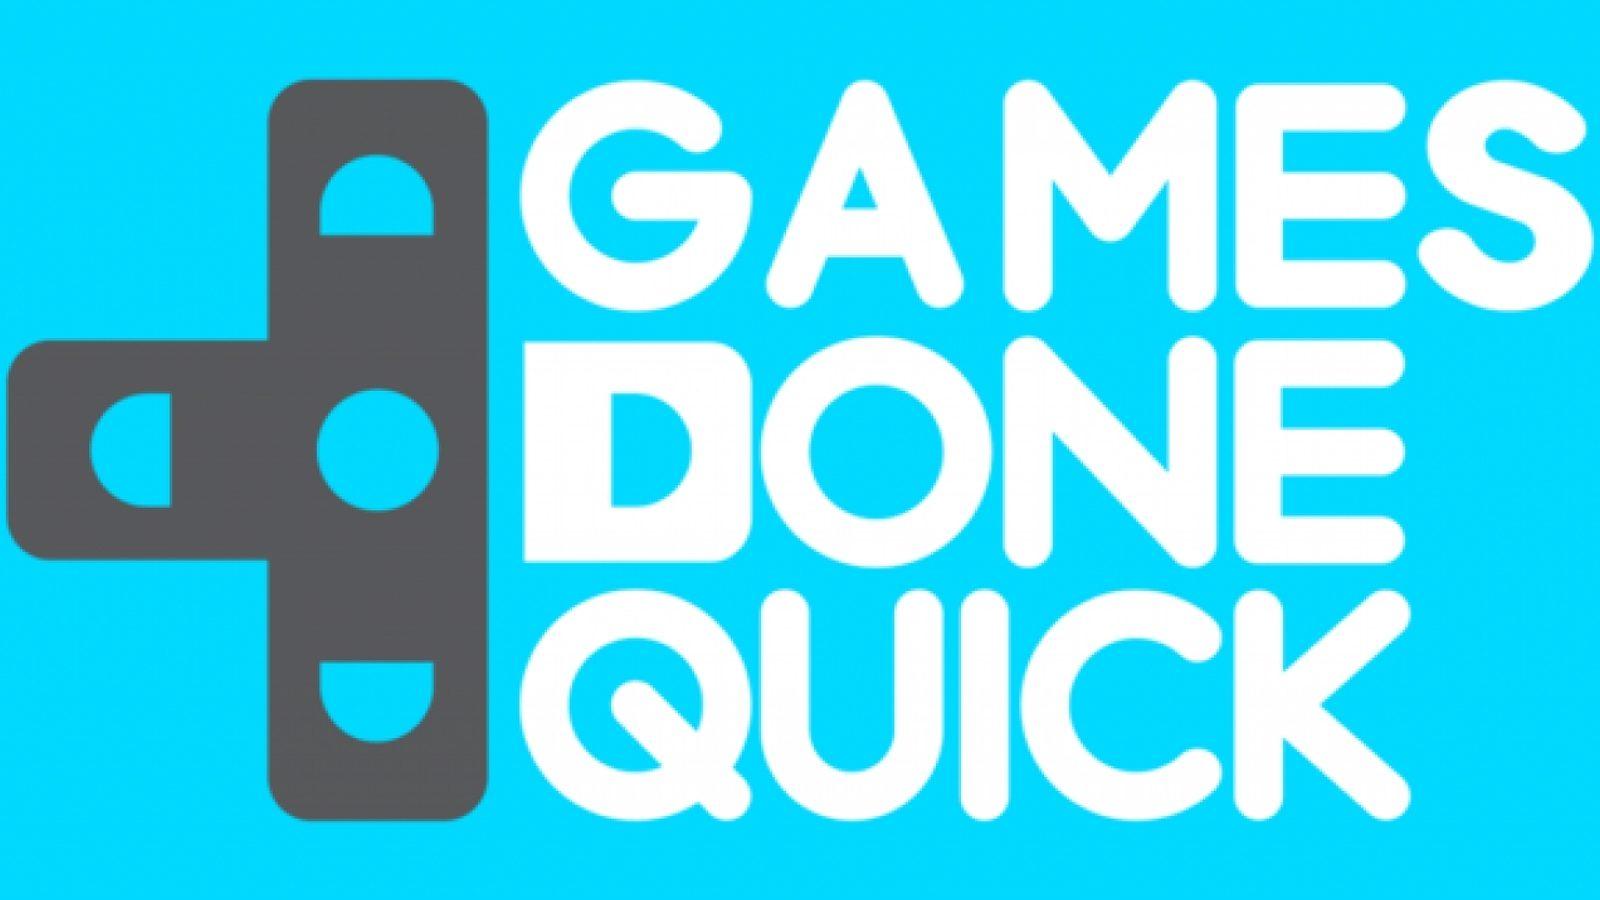 AGDQ